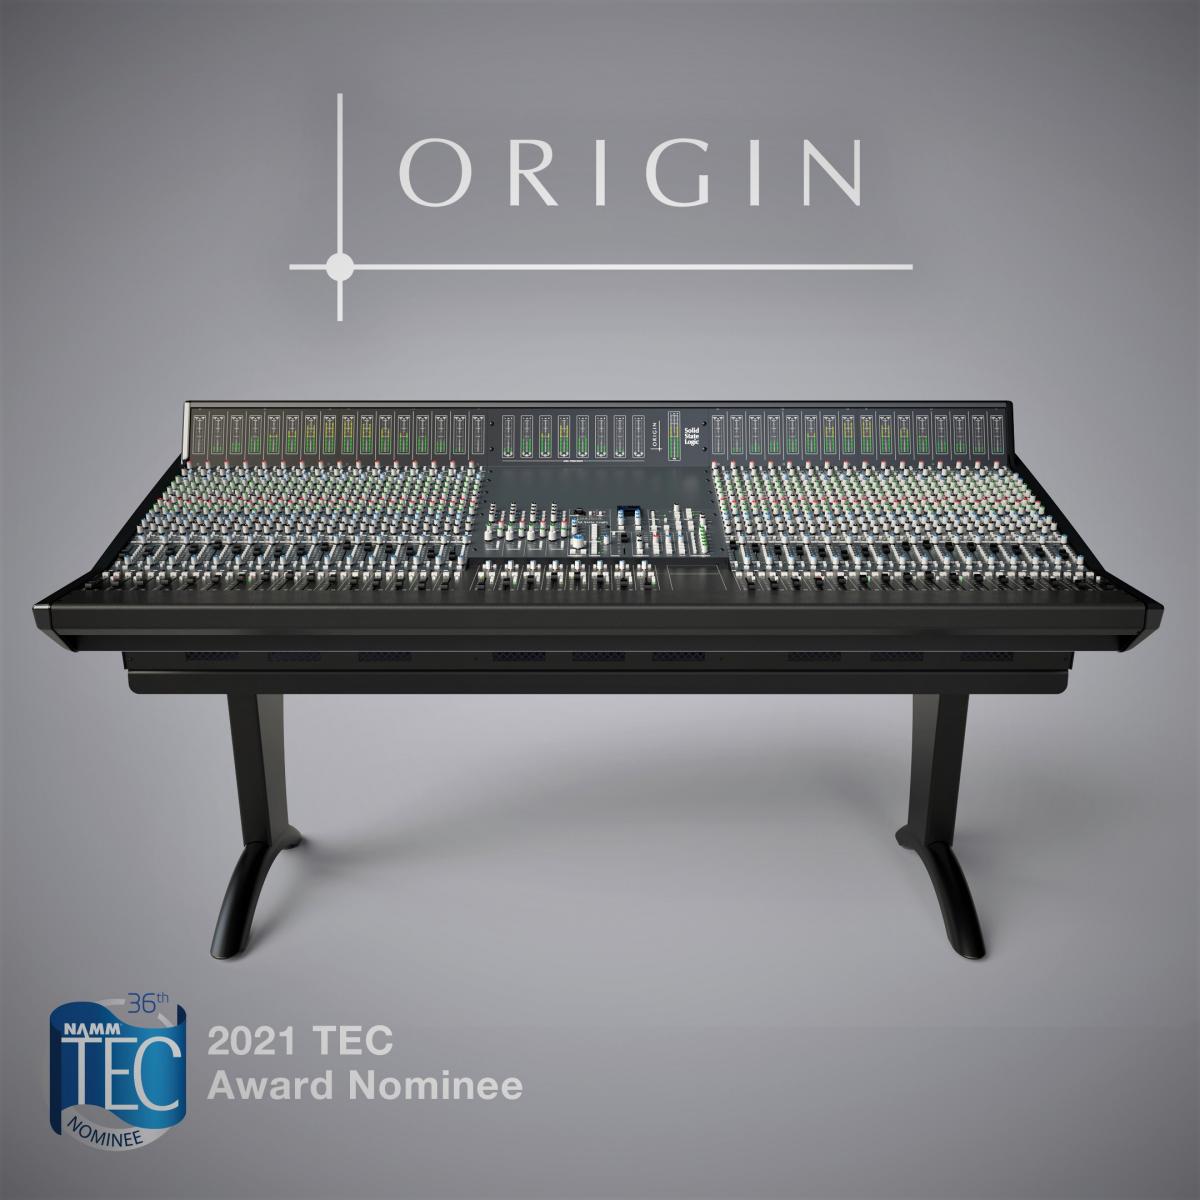 Category: Large Format Console 